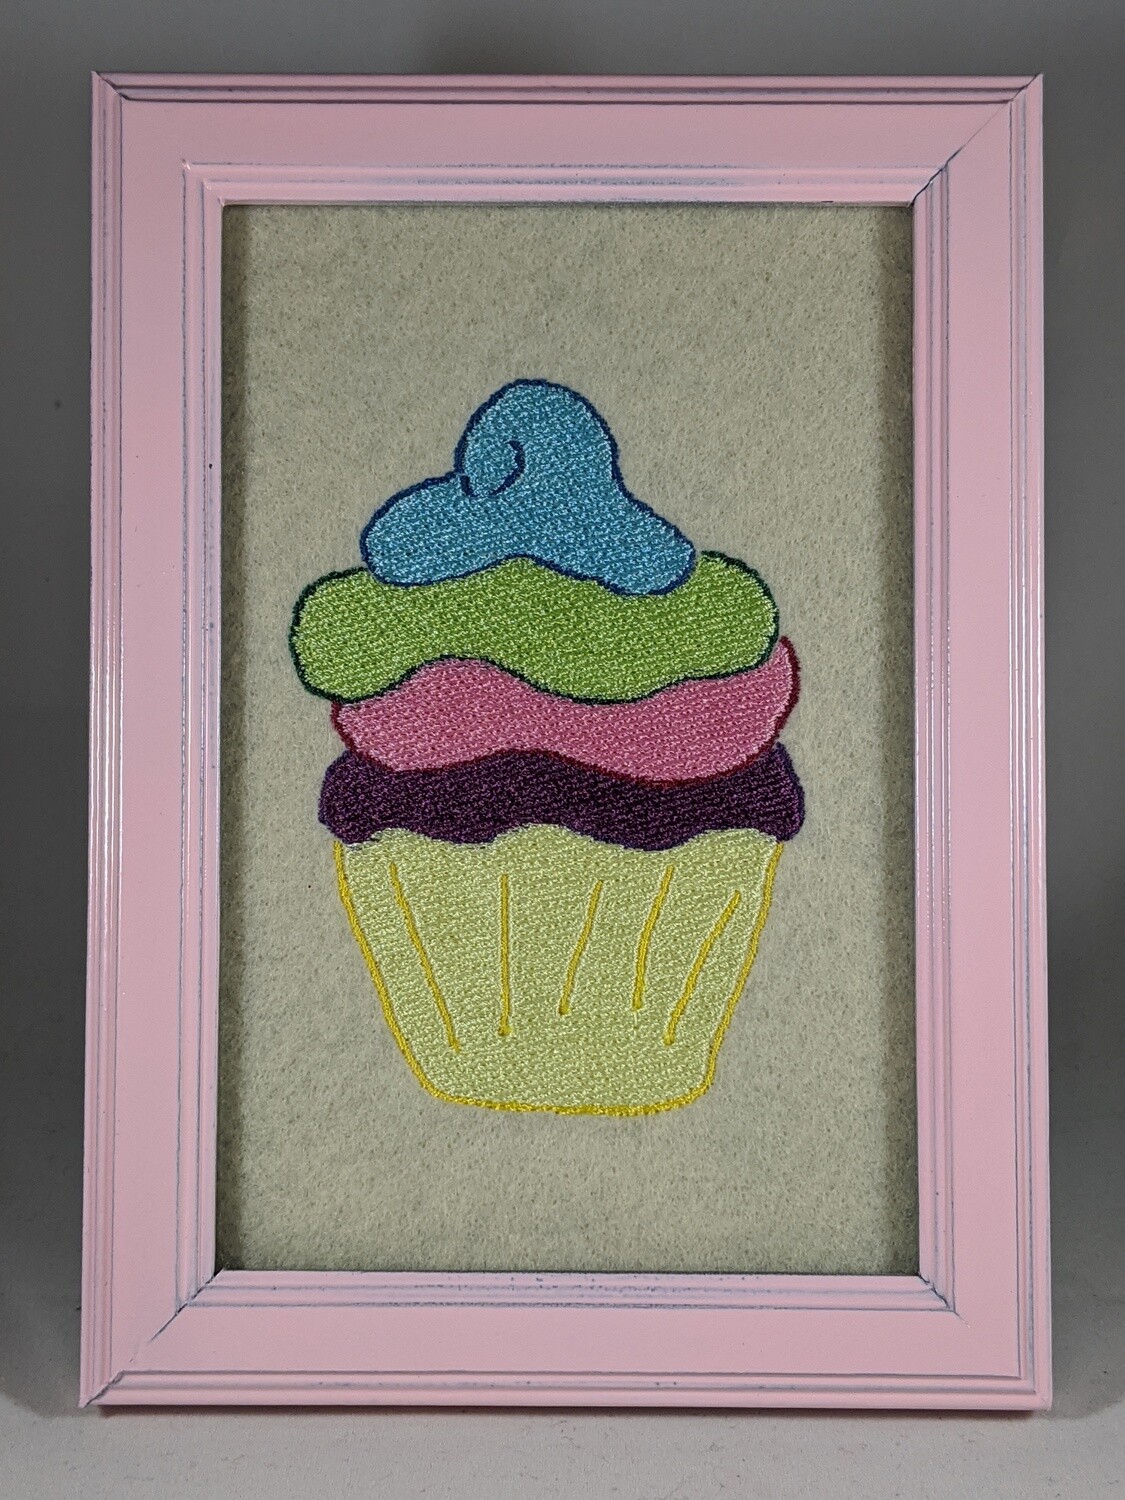 Cupcake - Whimsical Desserts Embroidered Artwork